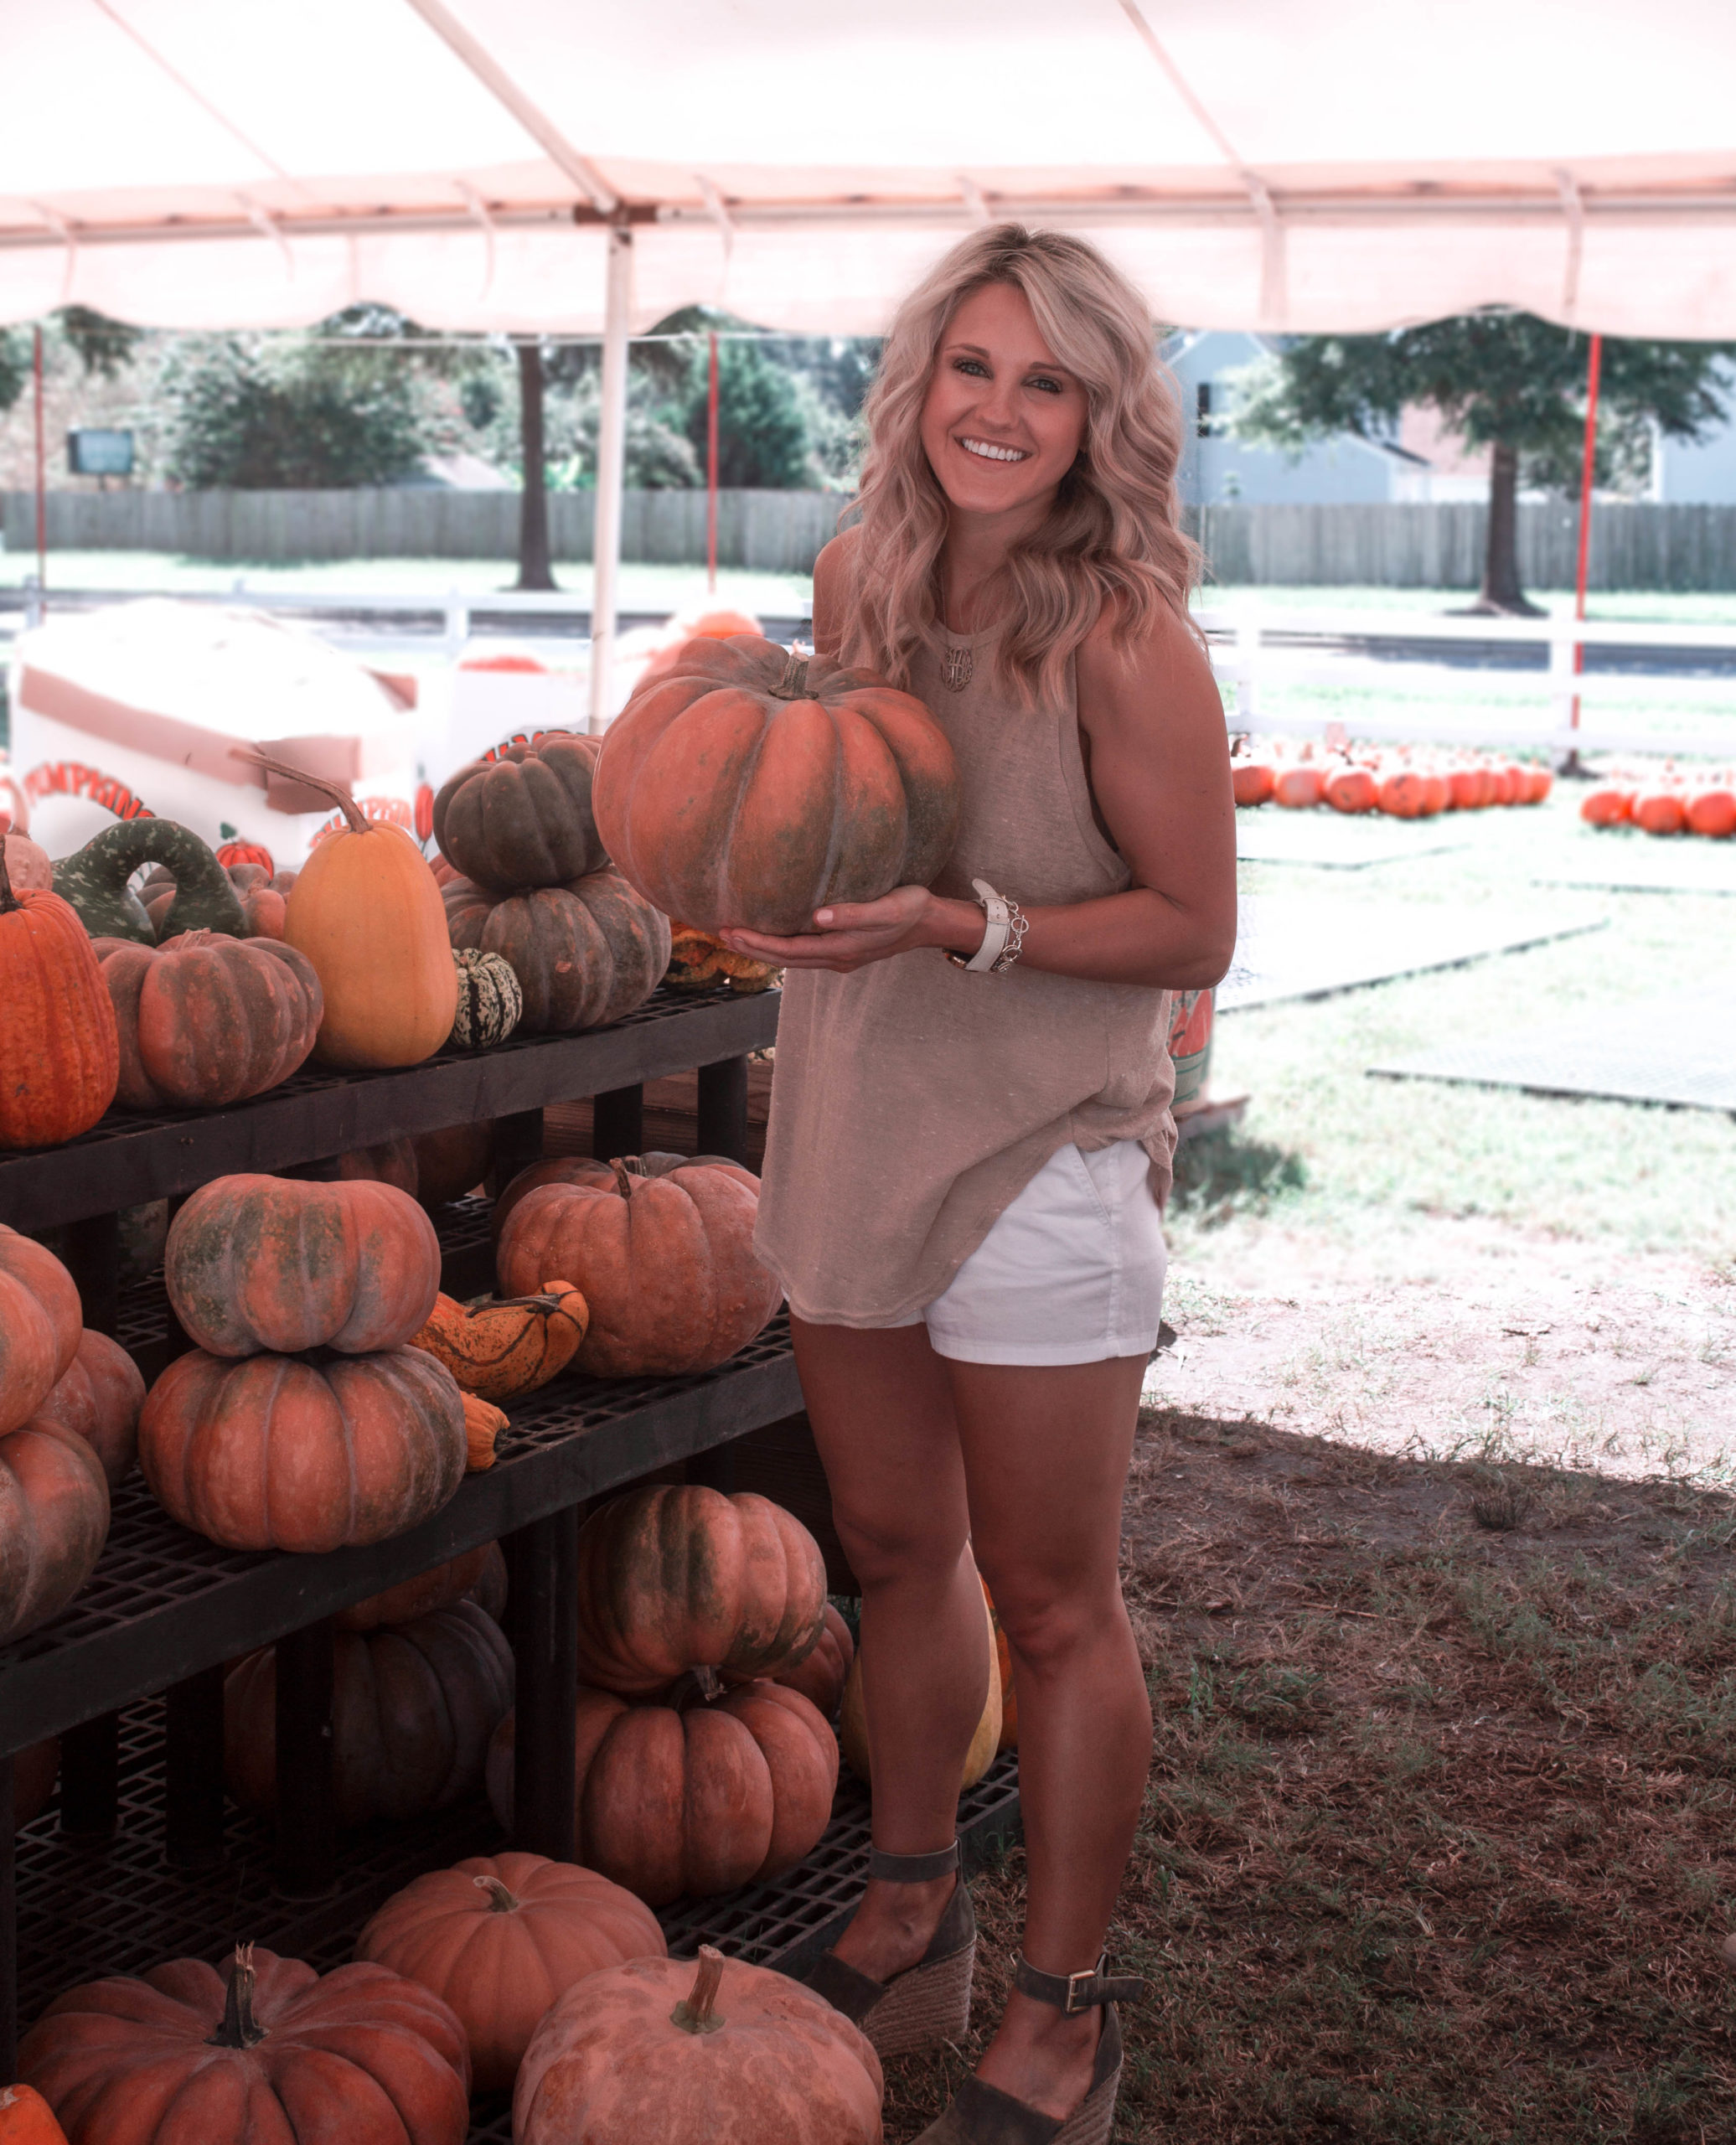 The Surprising Thing that Happened at the Pumpkin Patch